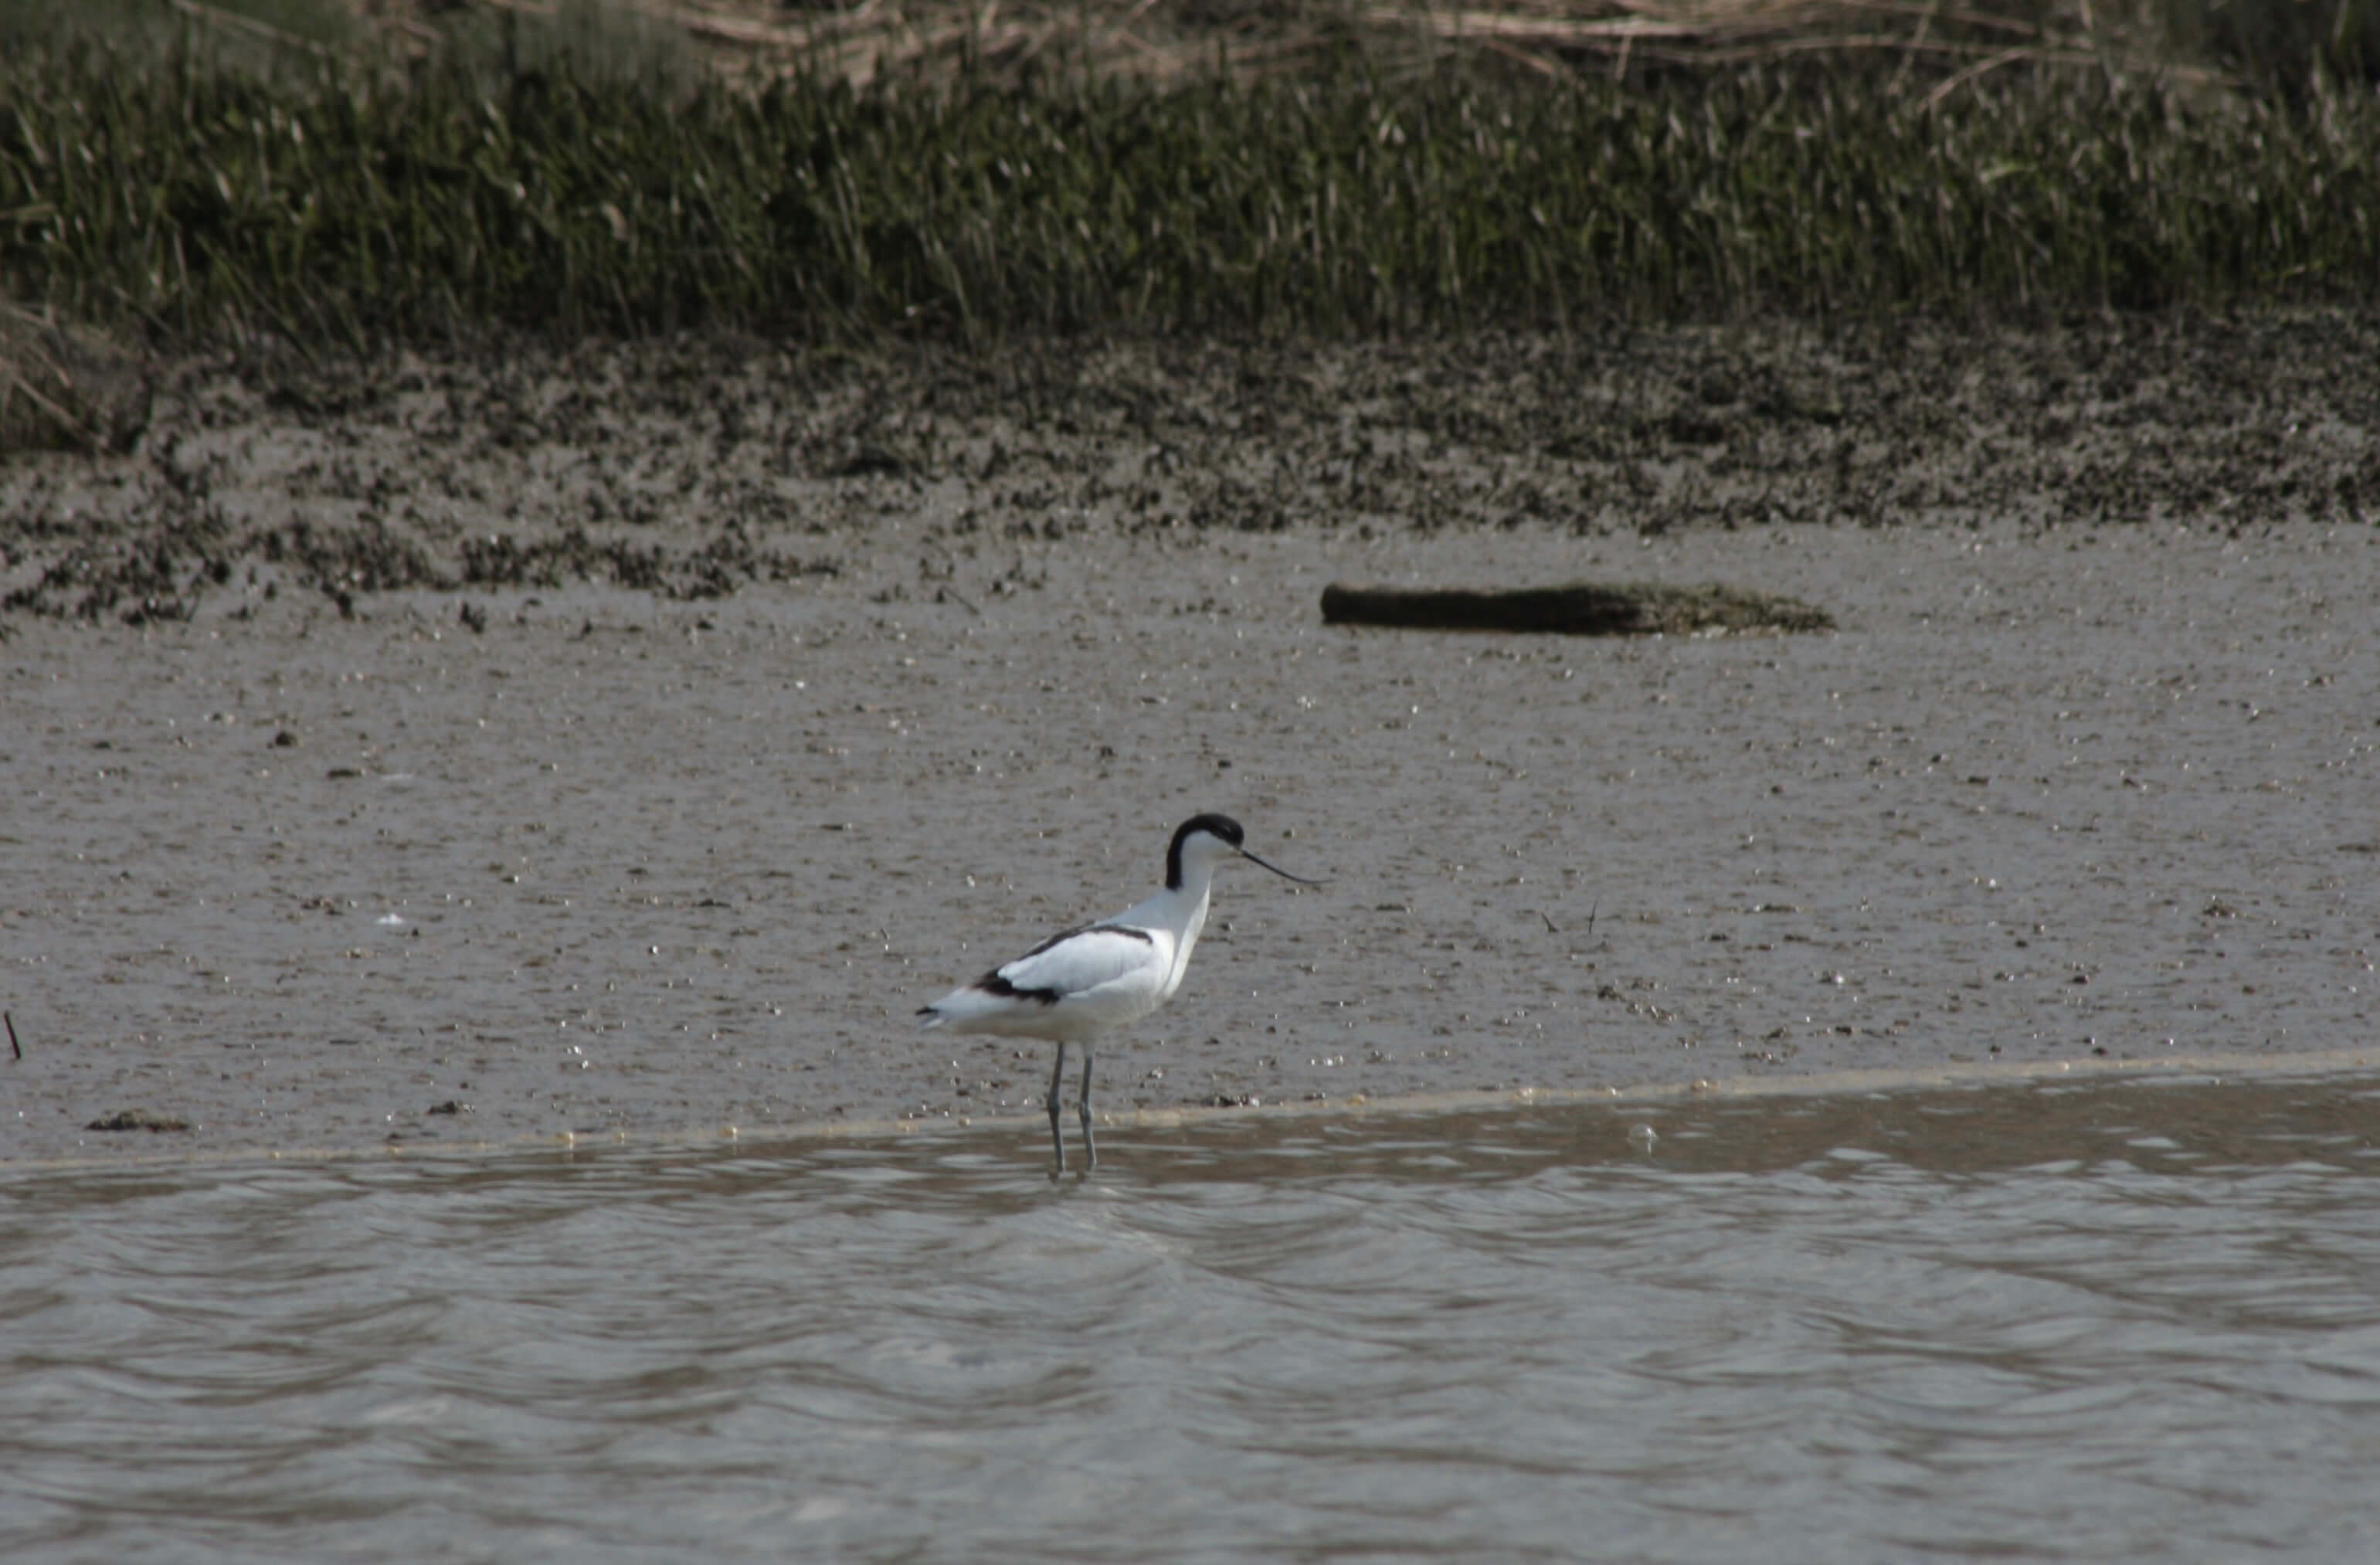 An Avocet standing in the water by the bank